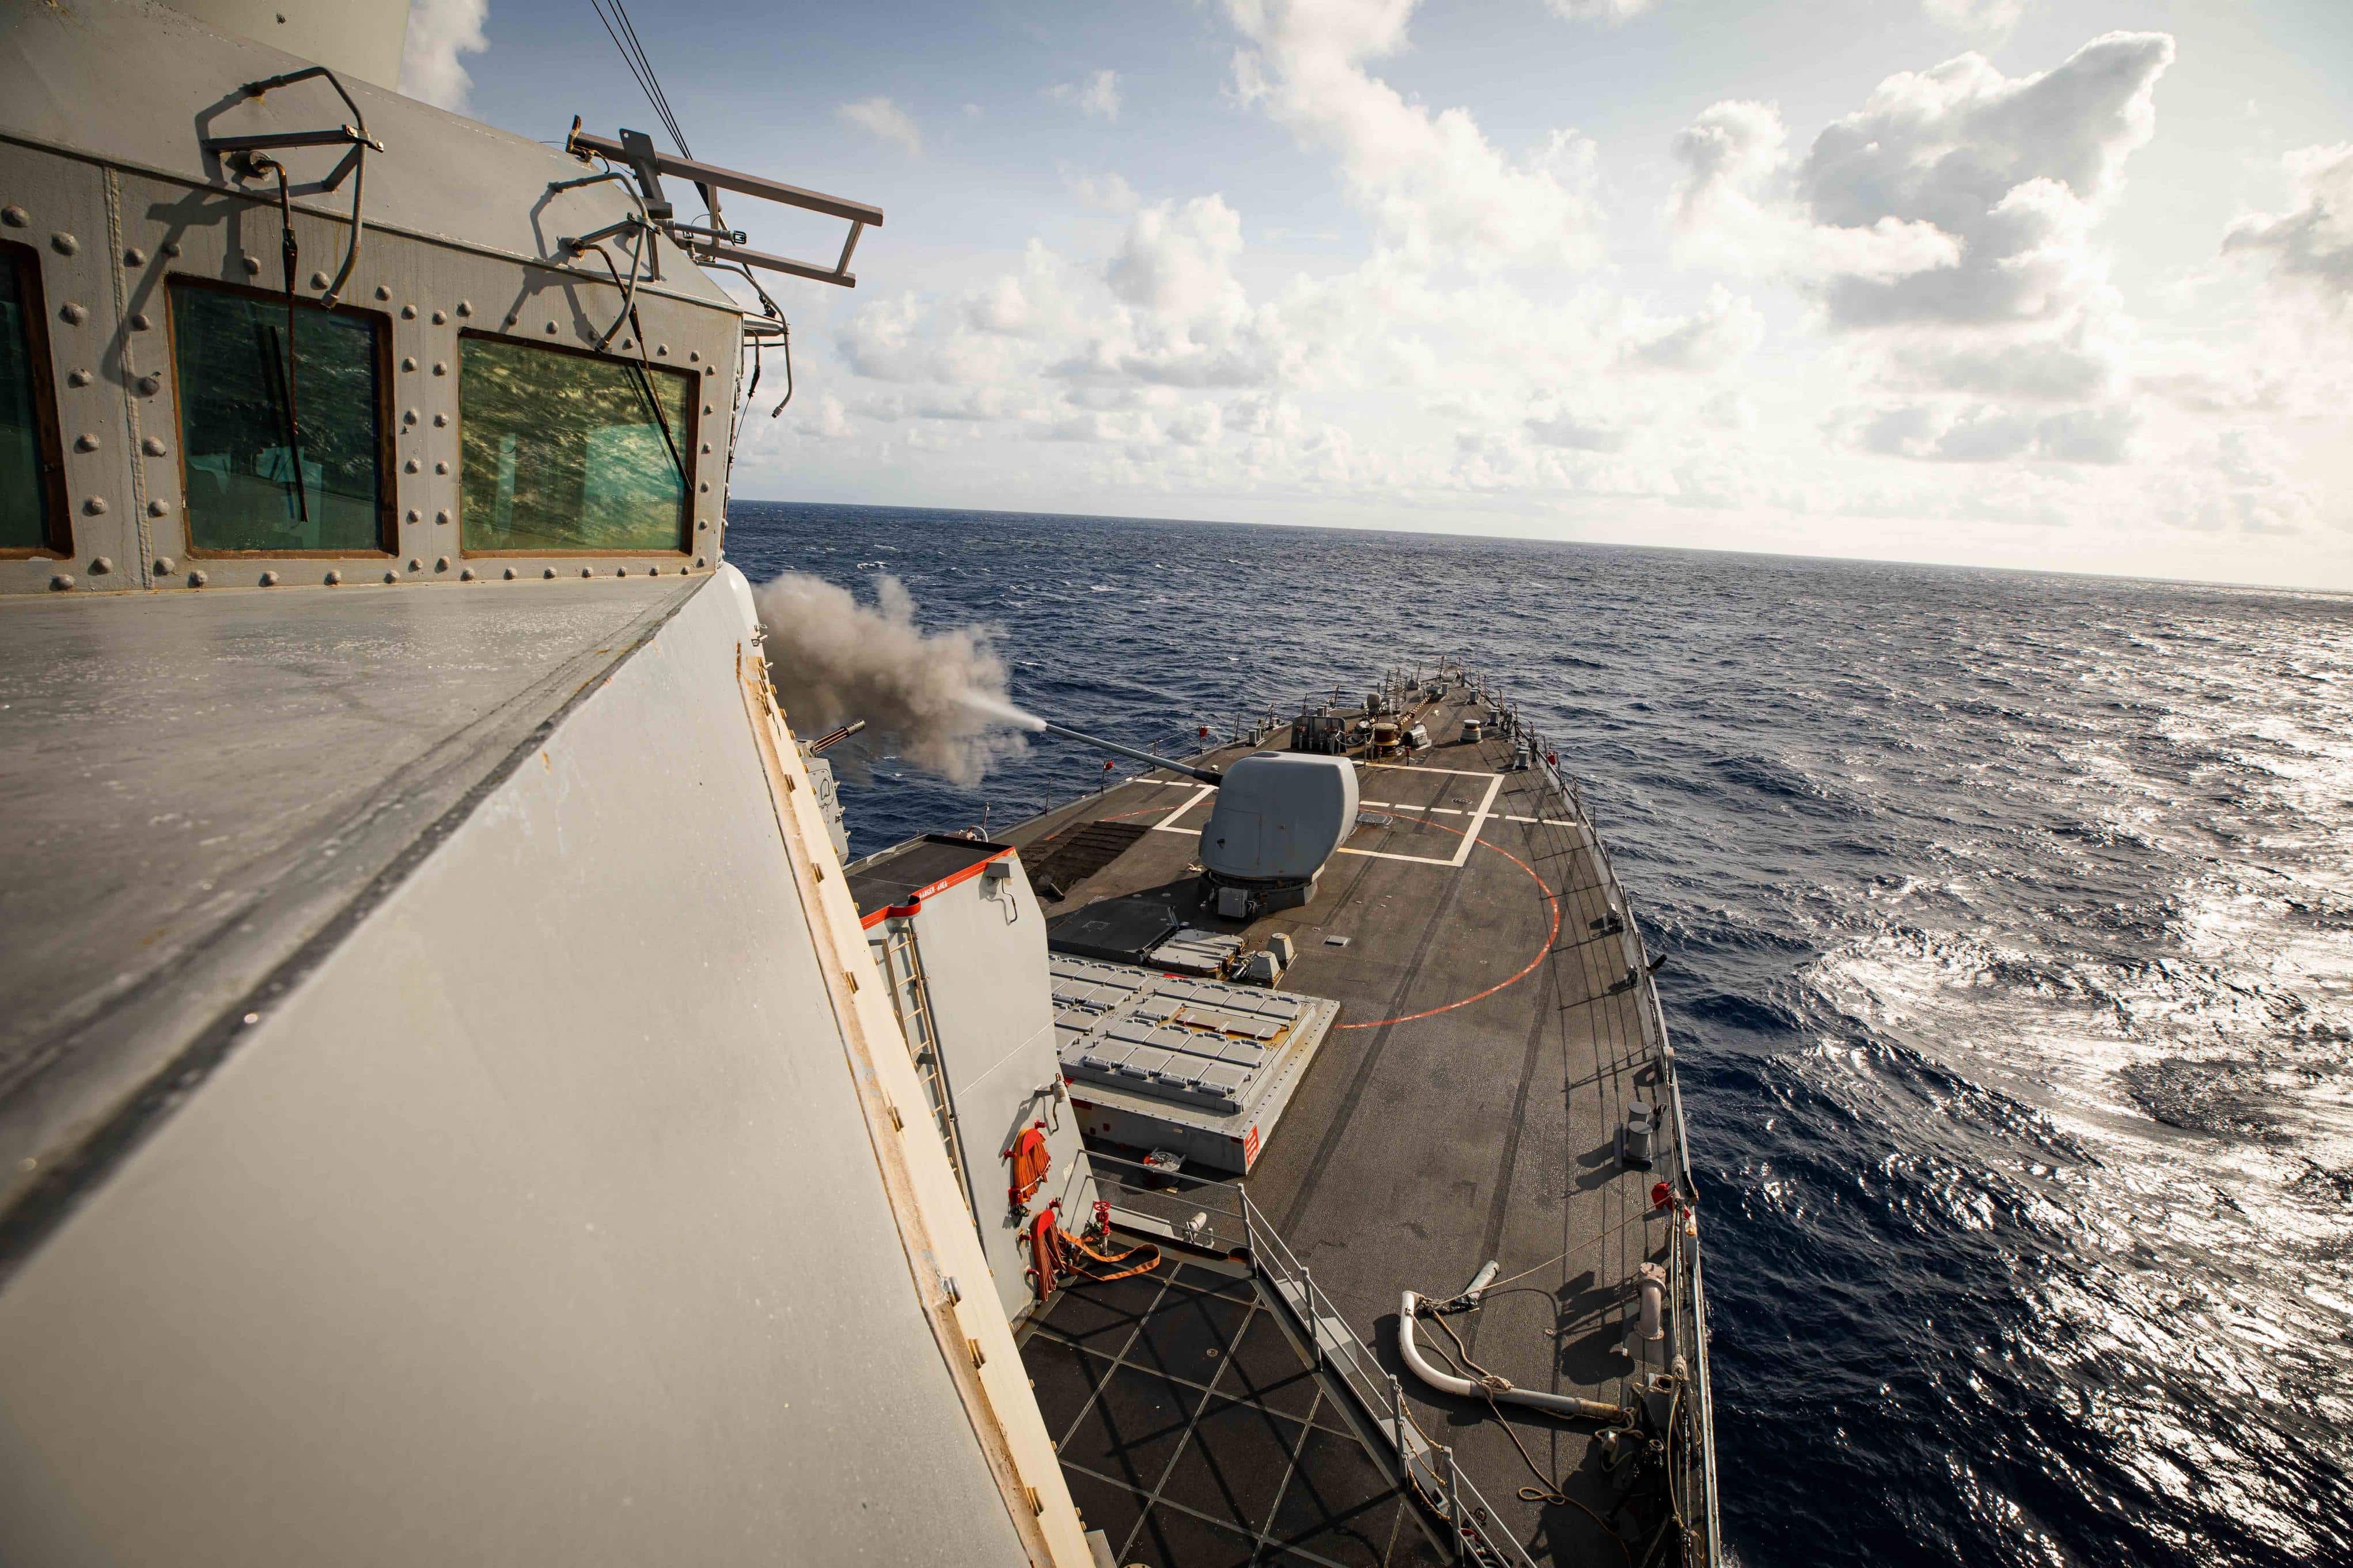 ATLANTIC OCEAN (Oct. 3, 2023) The Arleigh Burke-class guided-missile destroyer USS Carney (DDG 64) fires the Mark 45 5-inch gun during a pre-action calibration firing (PACFIRE) in the Atlantic Ocean, October 3, 2023. Carney is on a scheduled deployment in the U.S. Naval Forces Europe area of operations, employed by the U.S. 6th Fleet, and U.S. 5th Fleet to defend U.S., allied and partner interests. (U.S. Navy photo by Mass Communication Specialist 2nd Class Aaron Lau)